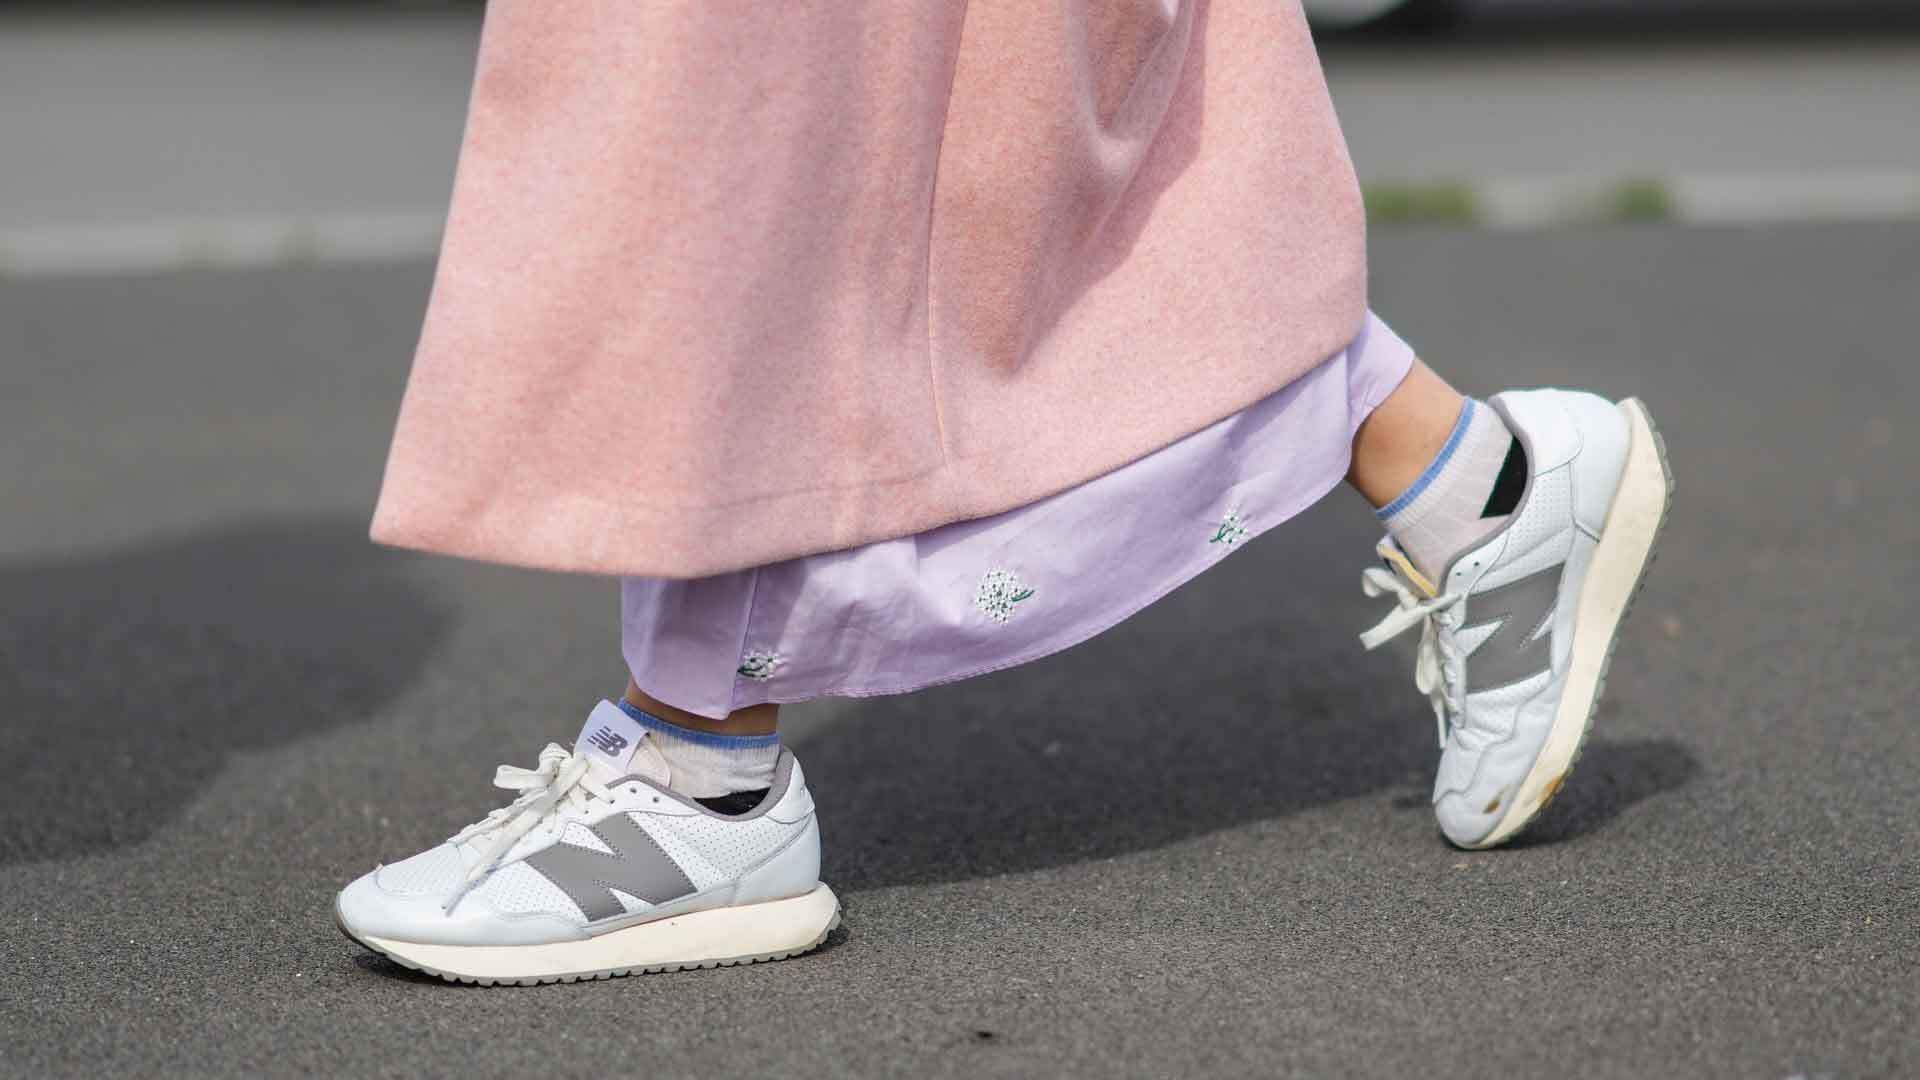 Sneakers with a dress? This is how you style the trend duo of late summer